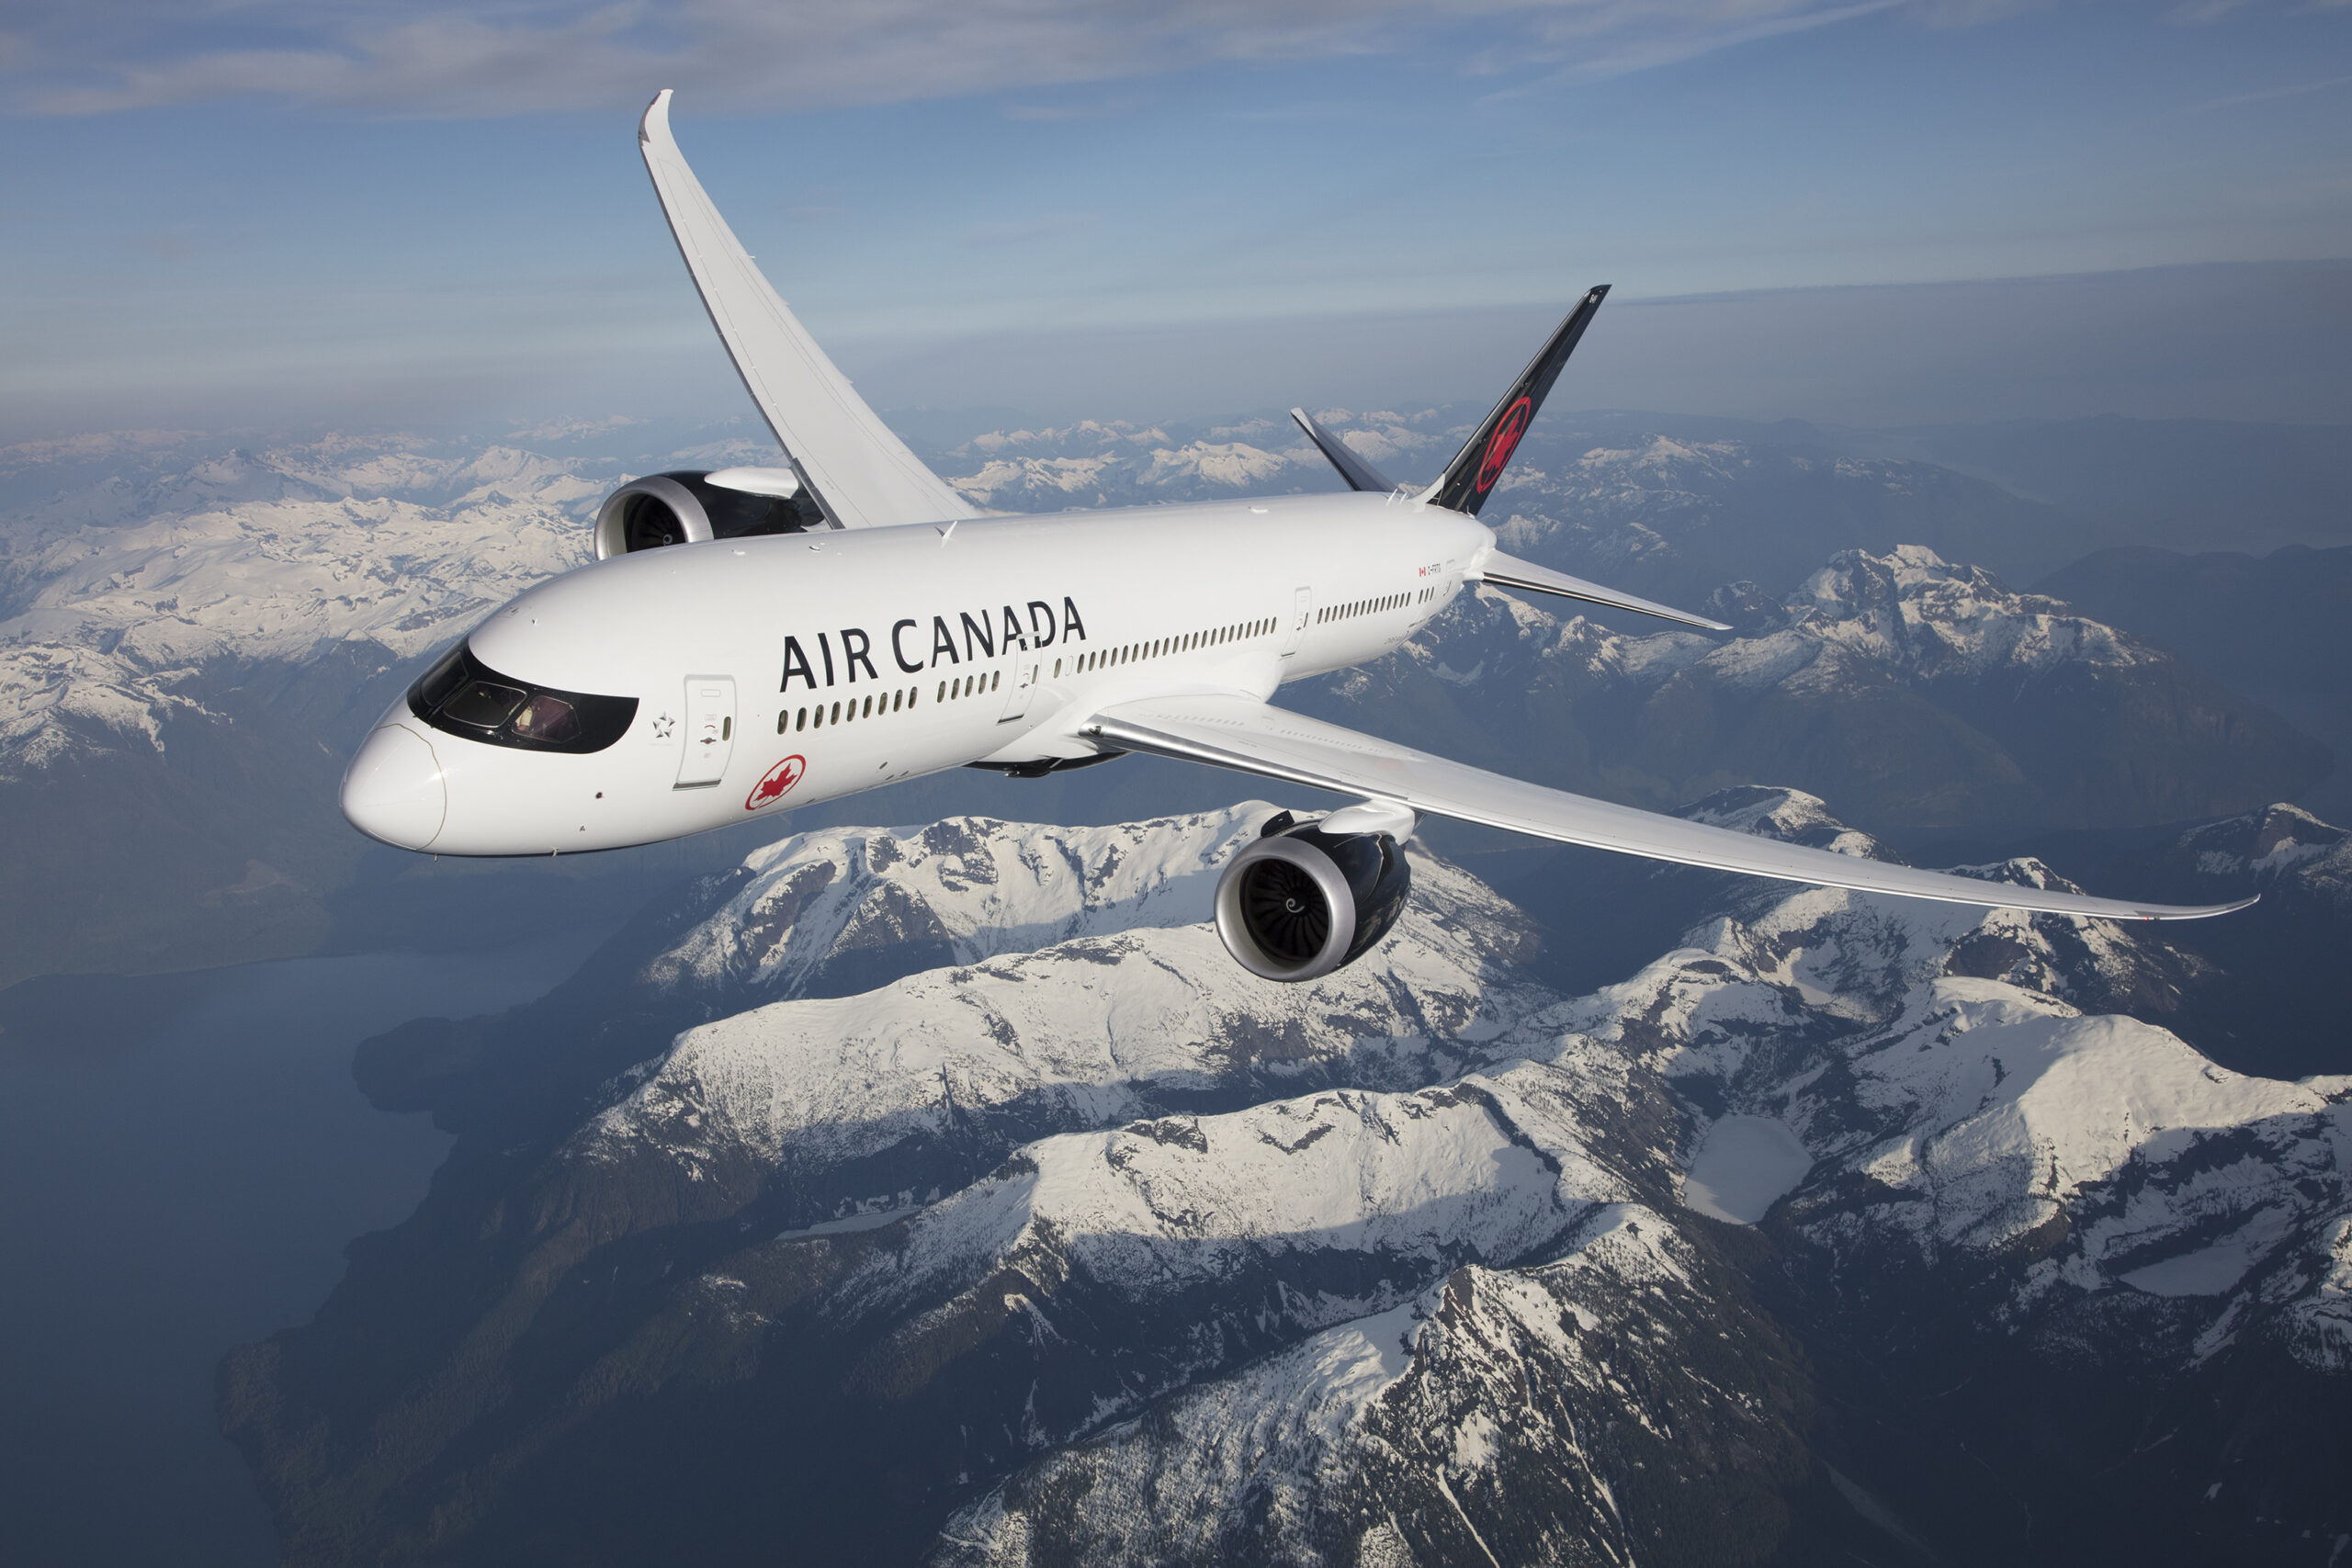 Travel to the United States: Air Canada offers customers a large number of express tests

